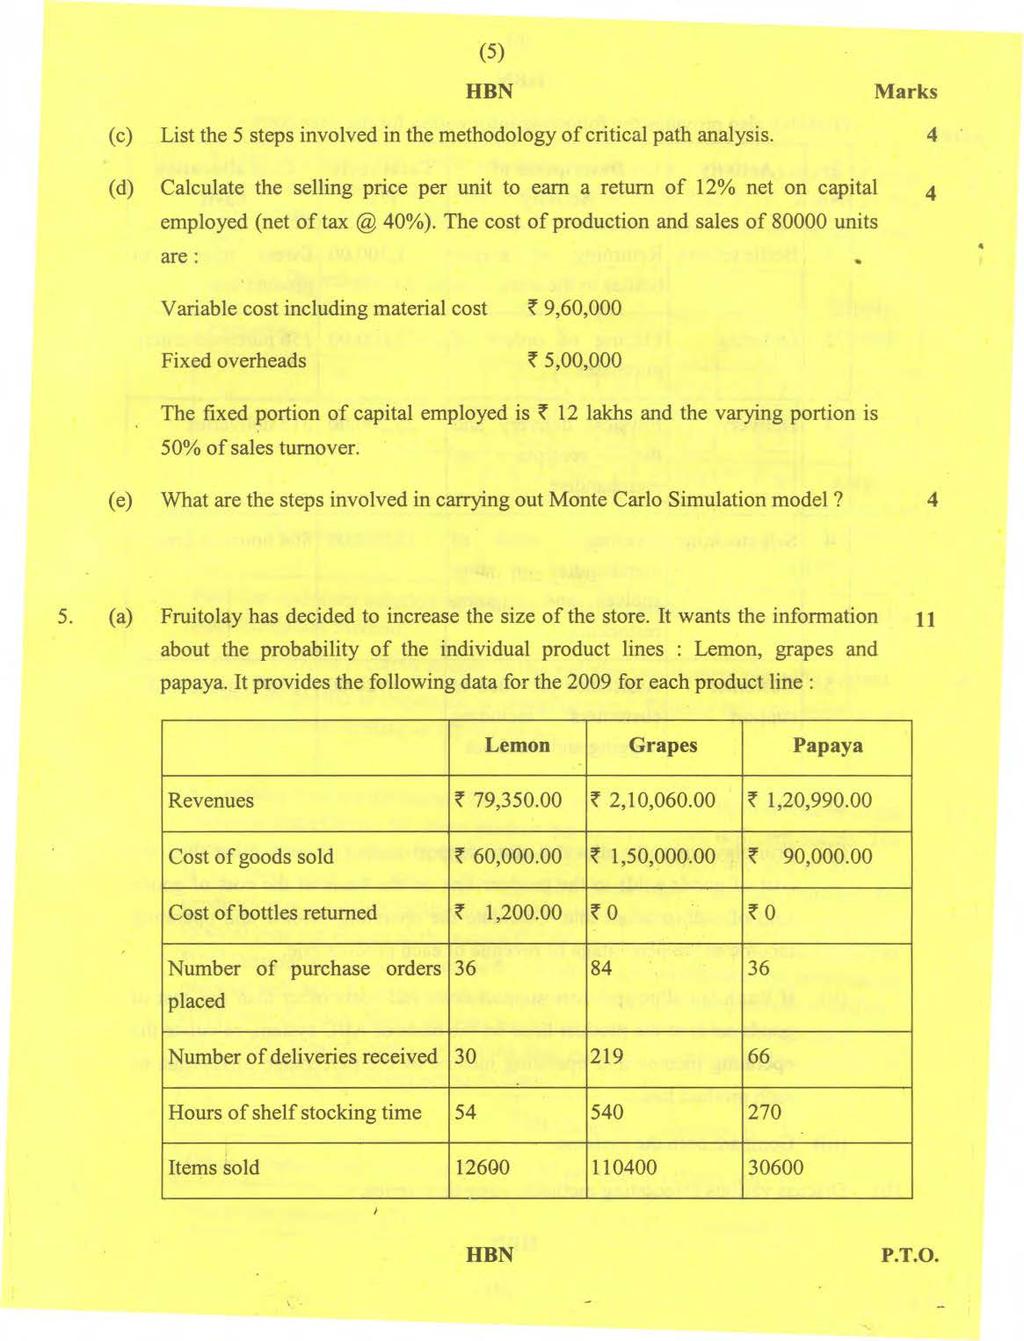 (5) (c) List the 5 steps involved in the methodology of critical path analysis. ' (d) Calculate the selling price per unit to earn a return of 12% net on capital employed (net of tax @ 0%).